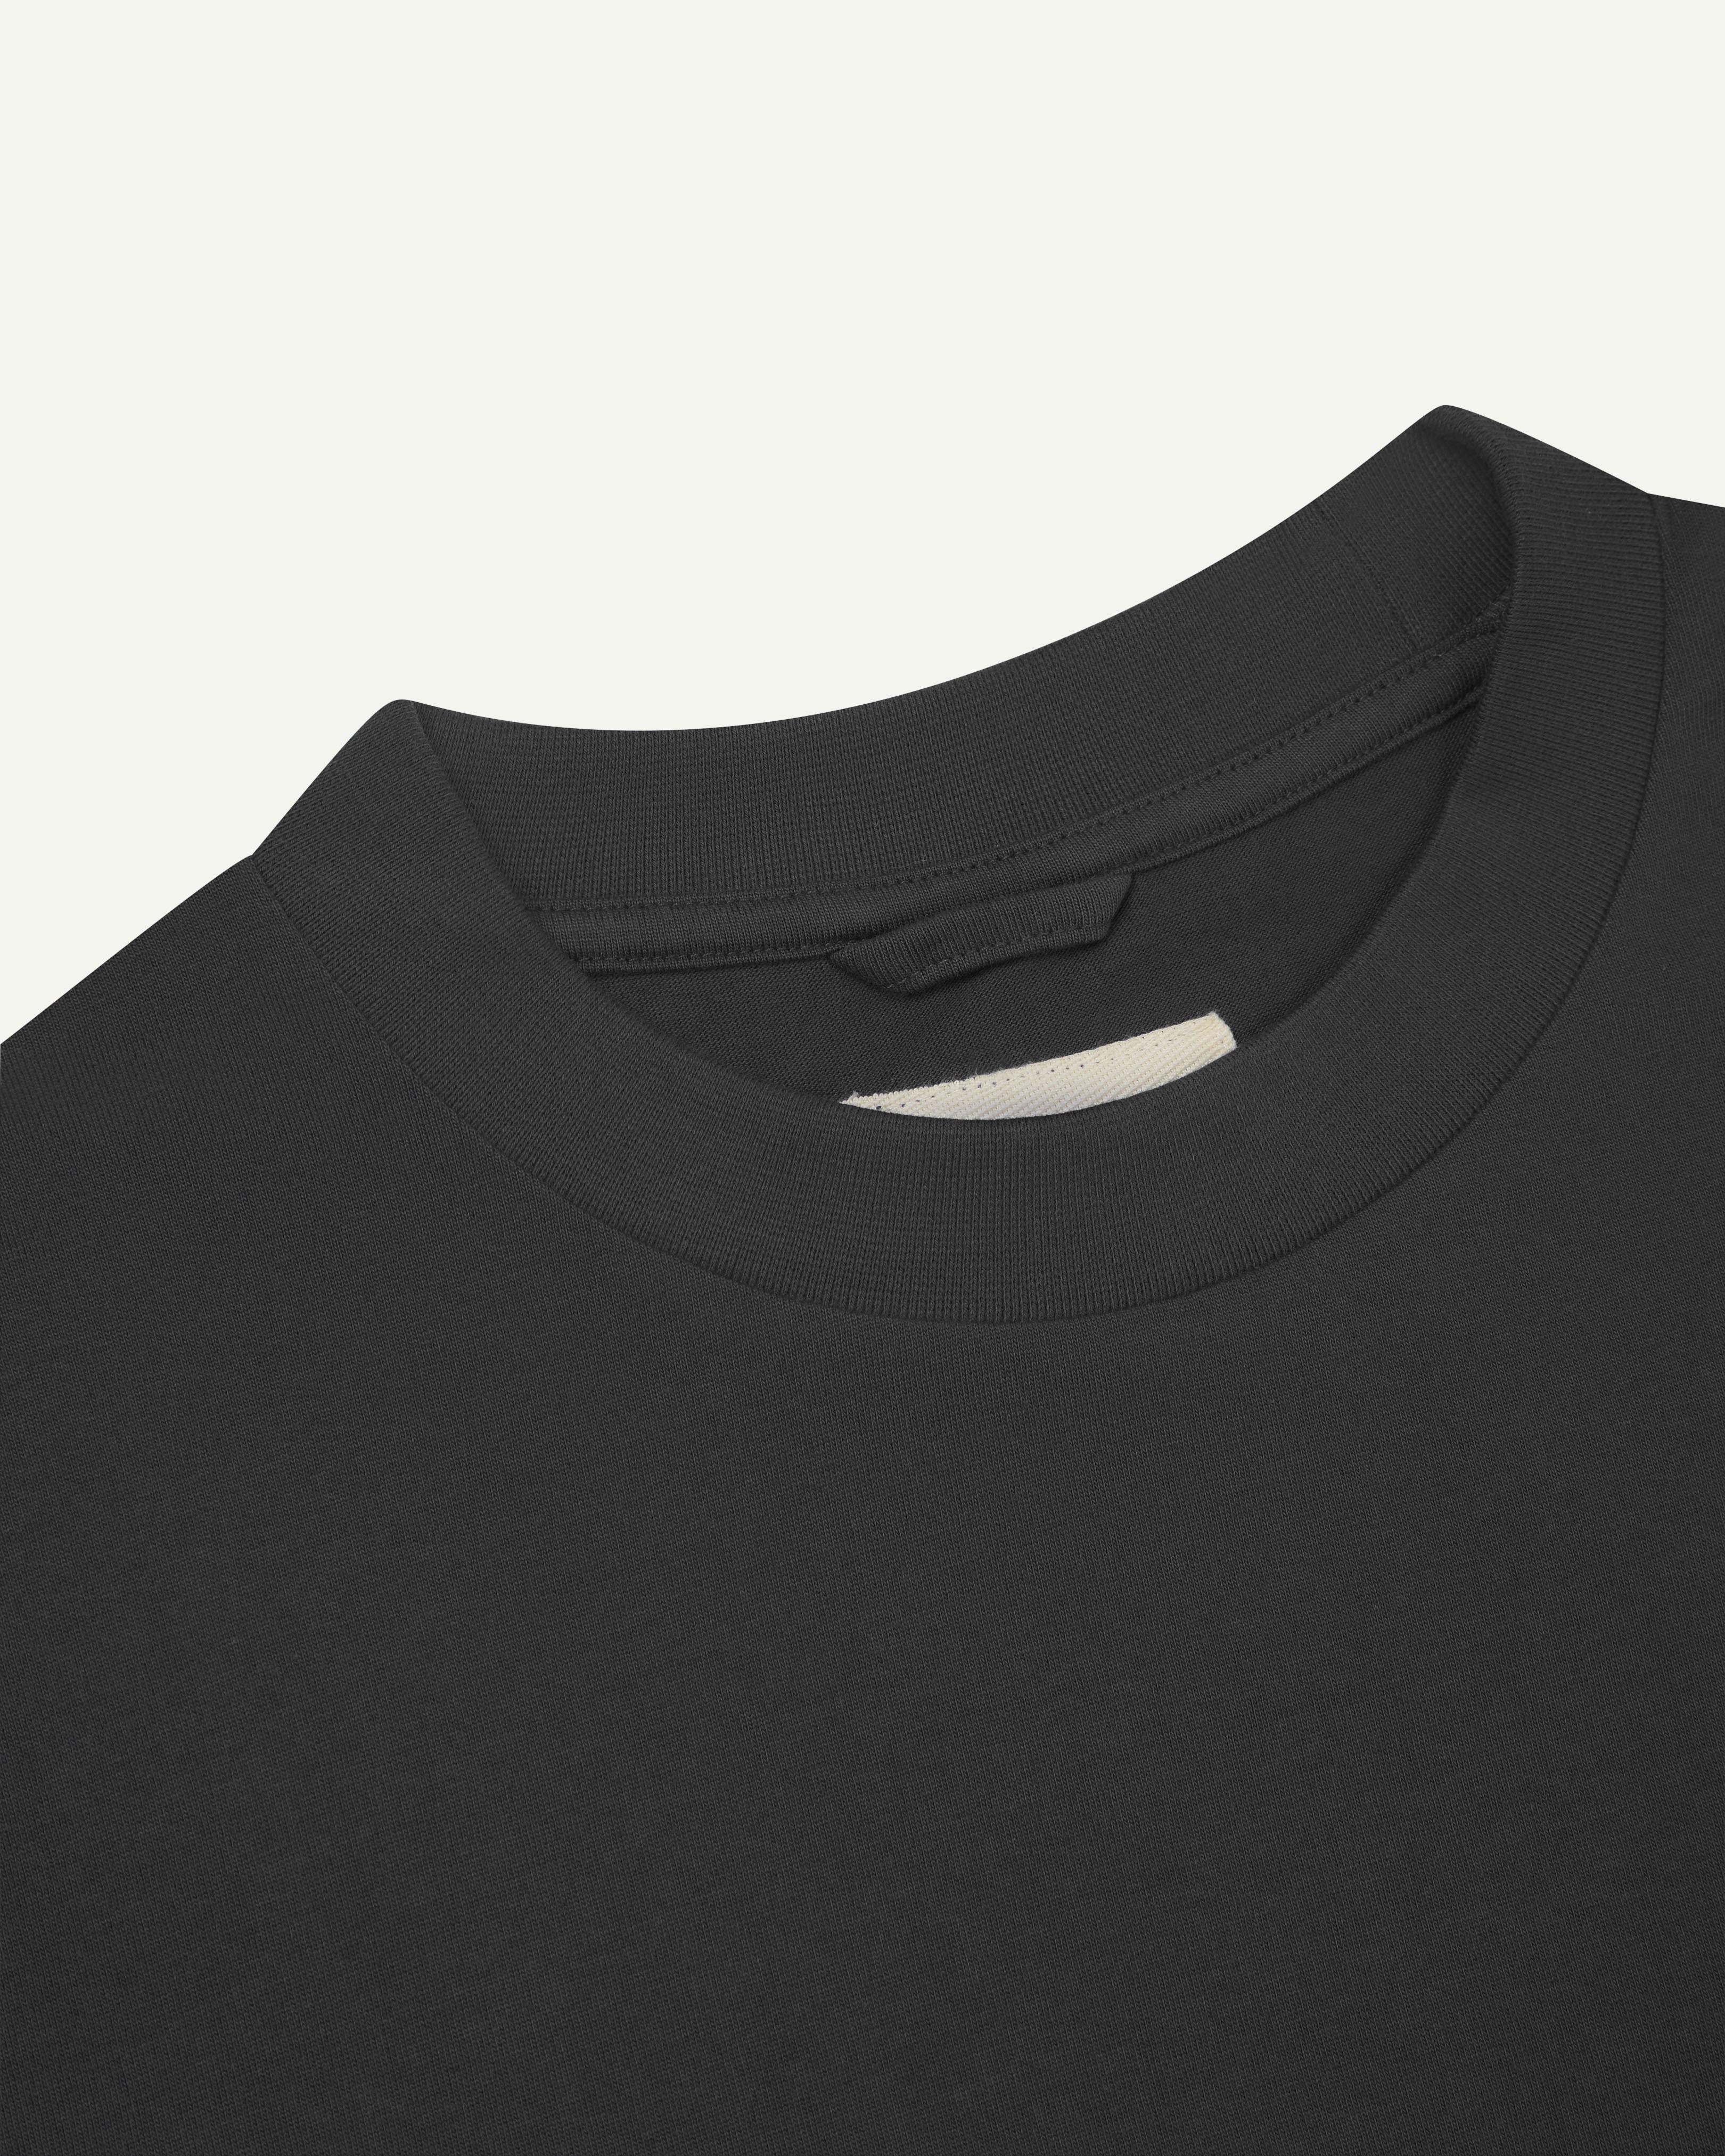 Close view of neck - men's dark grey oversized  organic cotton T-shirt by Uskees